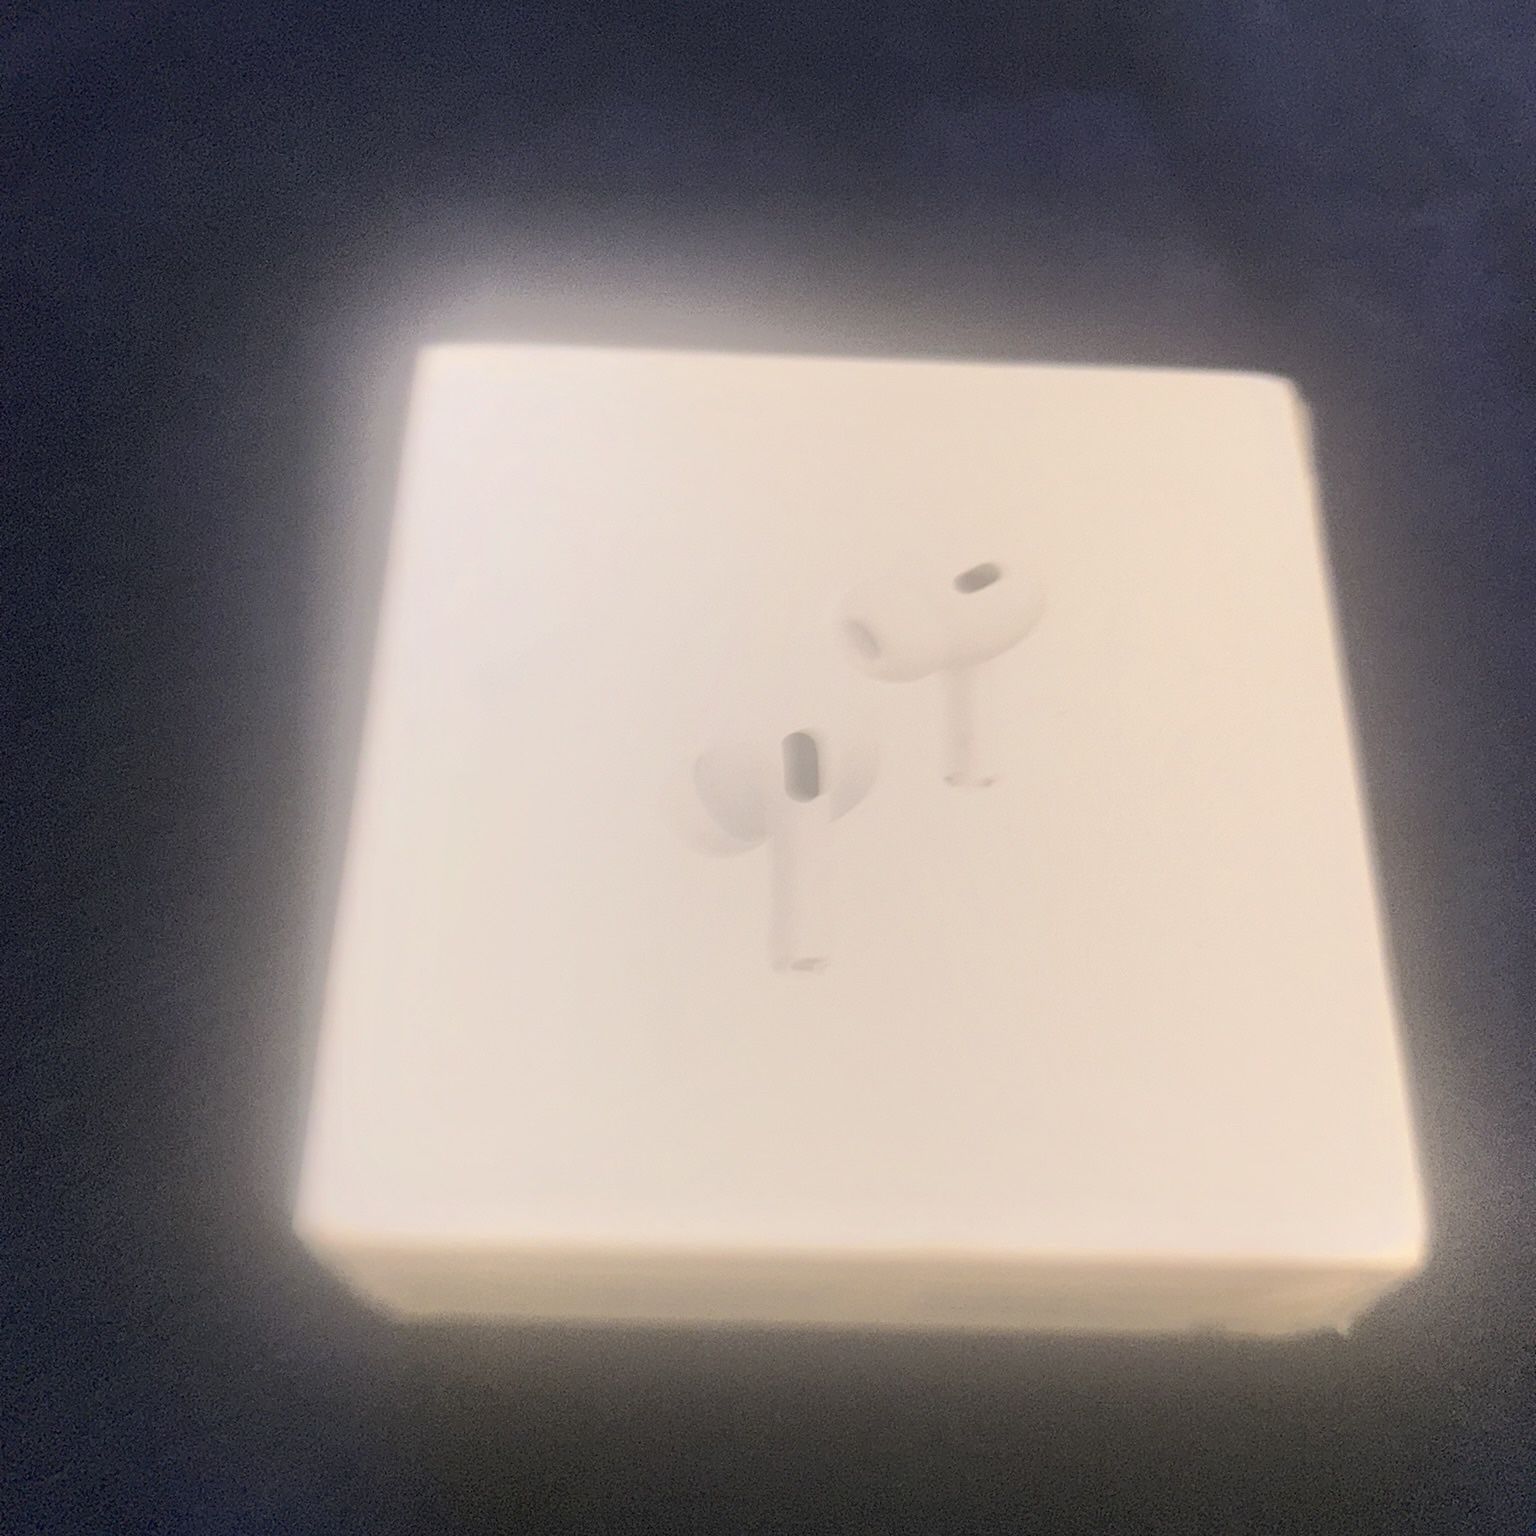 Apple AirPods Magsafe 2nd Generation Wireless In-Ear Headset - White - Excellent 